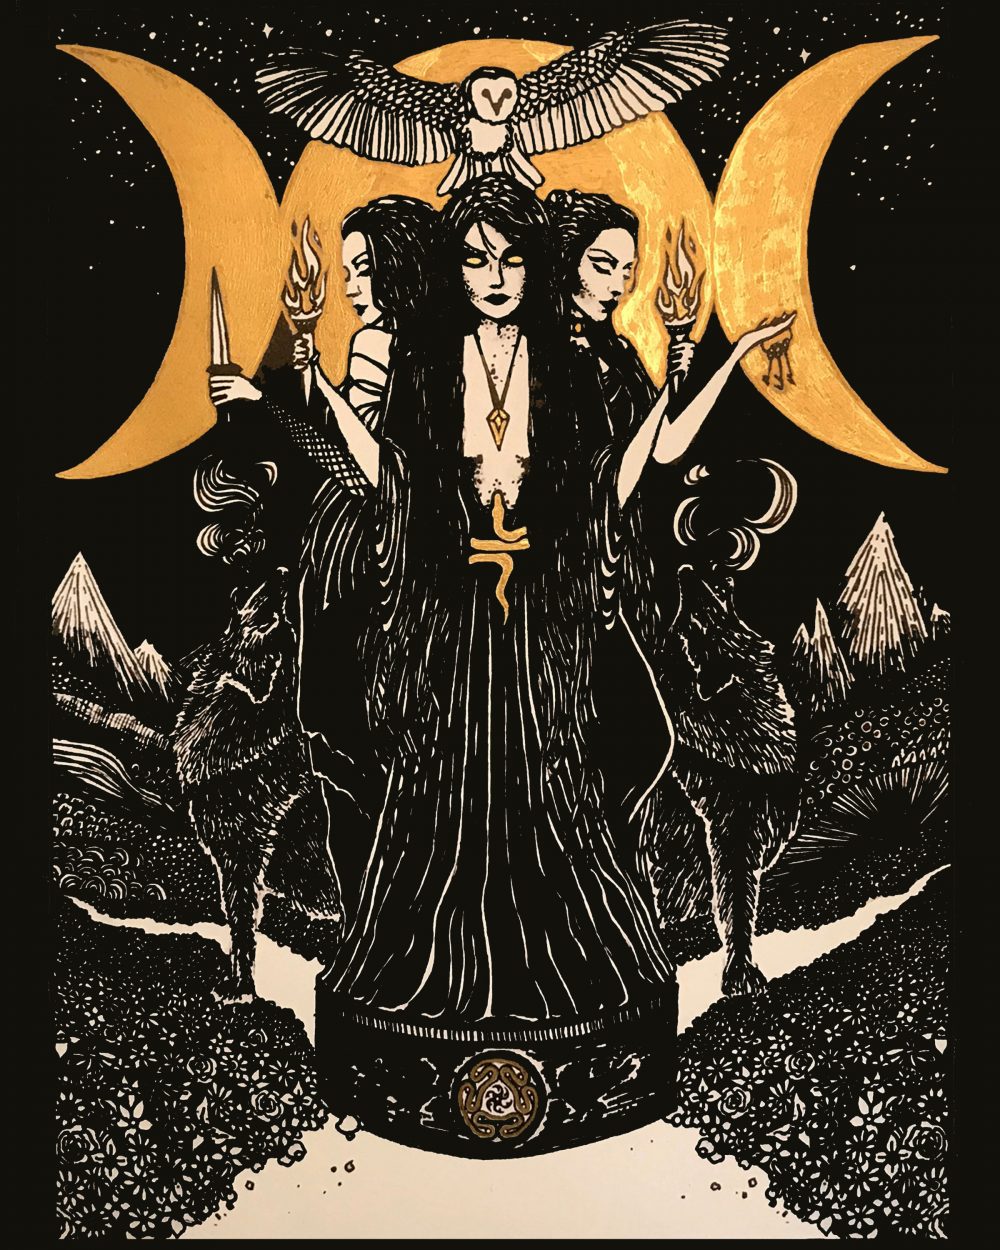 An ink drawing in black, white, and gold. Three roads intersect in the center bottom of the image and, there, is a pedestal with the symbol of Hecate on the front. On the pedestal are three women standing with their backs together, each facing one of the roads. There are wolves on either side of the front-facing figure, who is holding torches. The figure on the right is holding a set of keys and the figure on the left is holding a ritual knife. In the sky behind the figures is a triple moon symbol. There is an owl flying above the figures. The scene is set at night, and most of the illuminated edges are white, while the background is black.